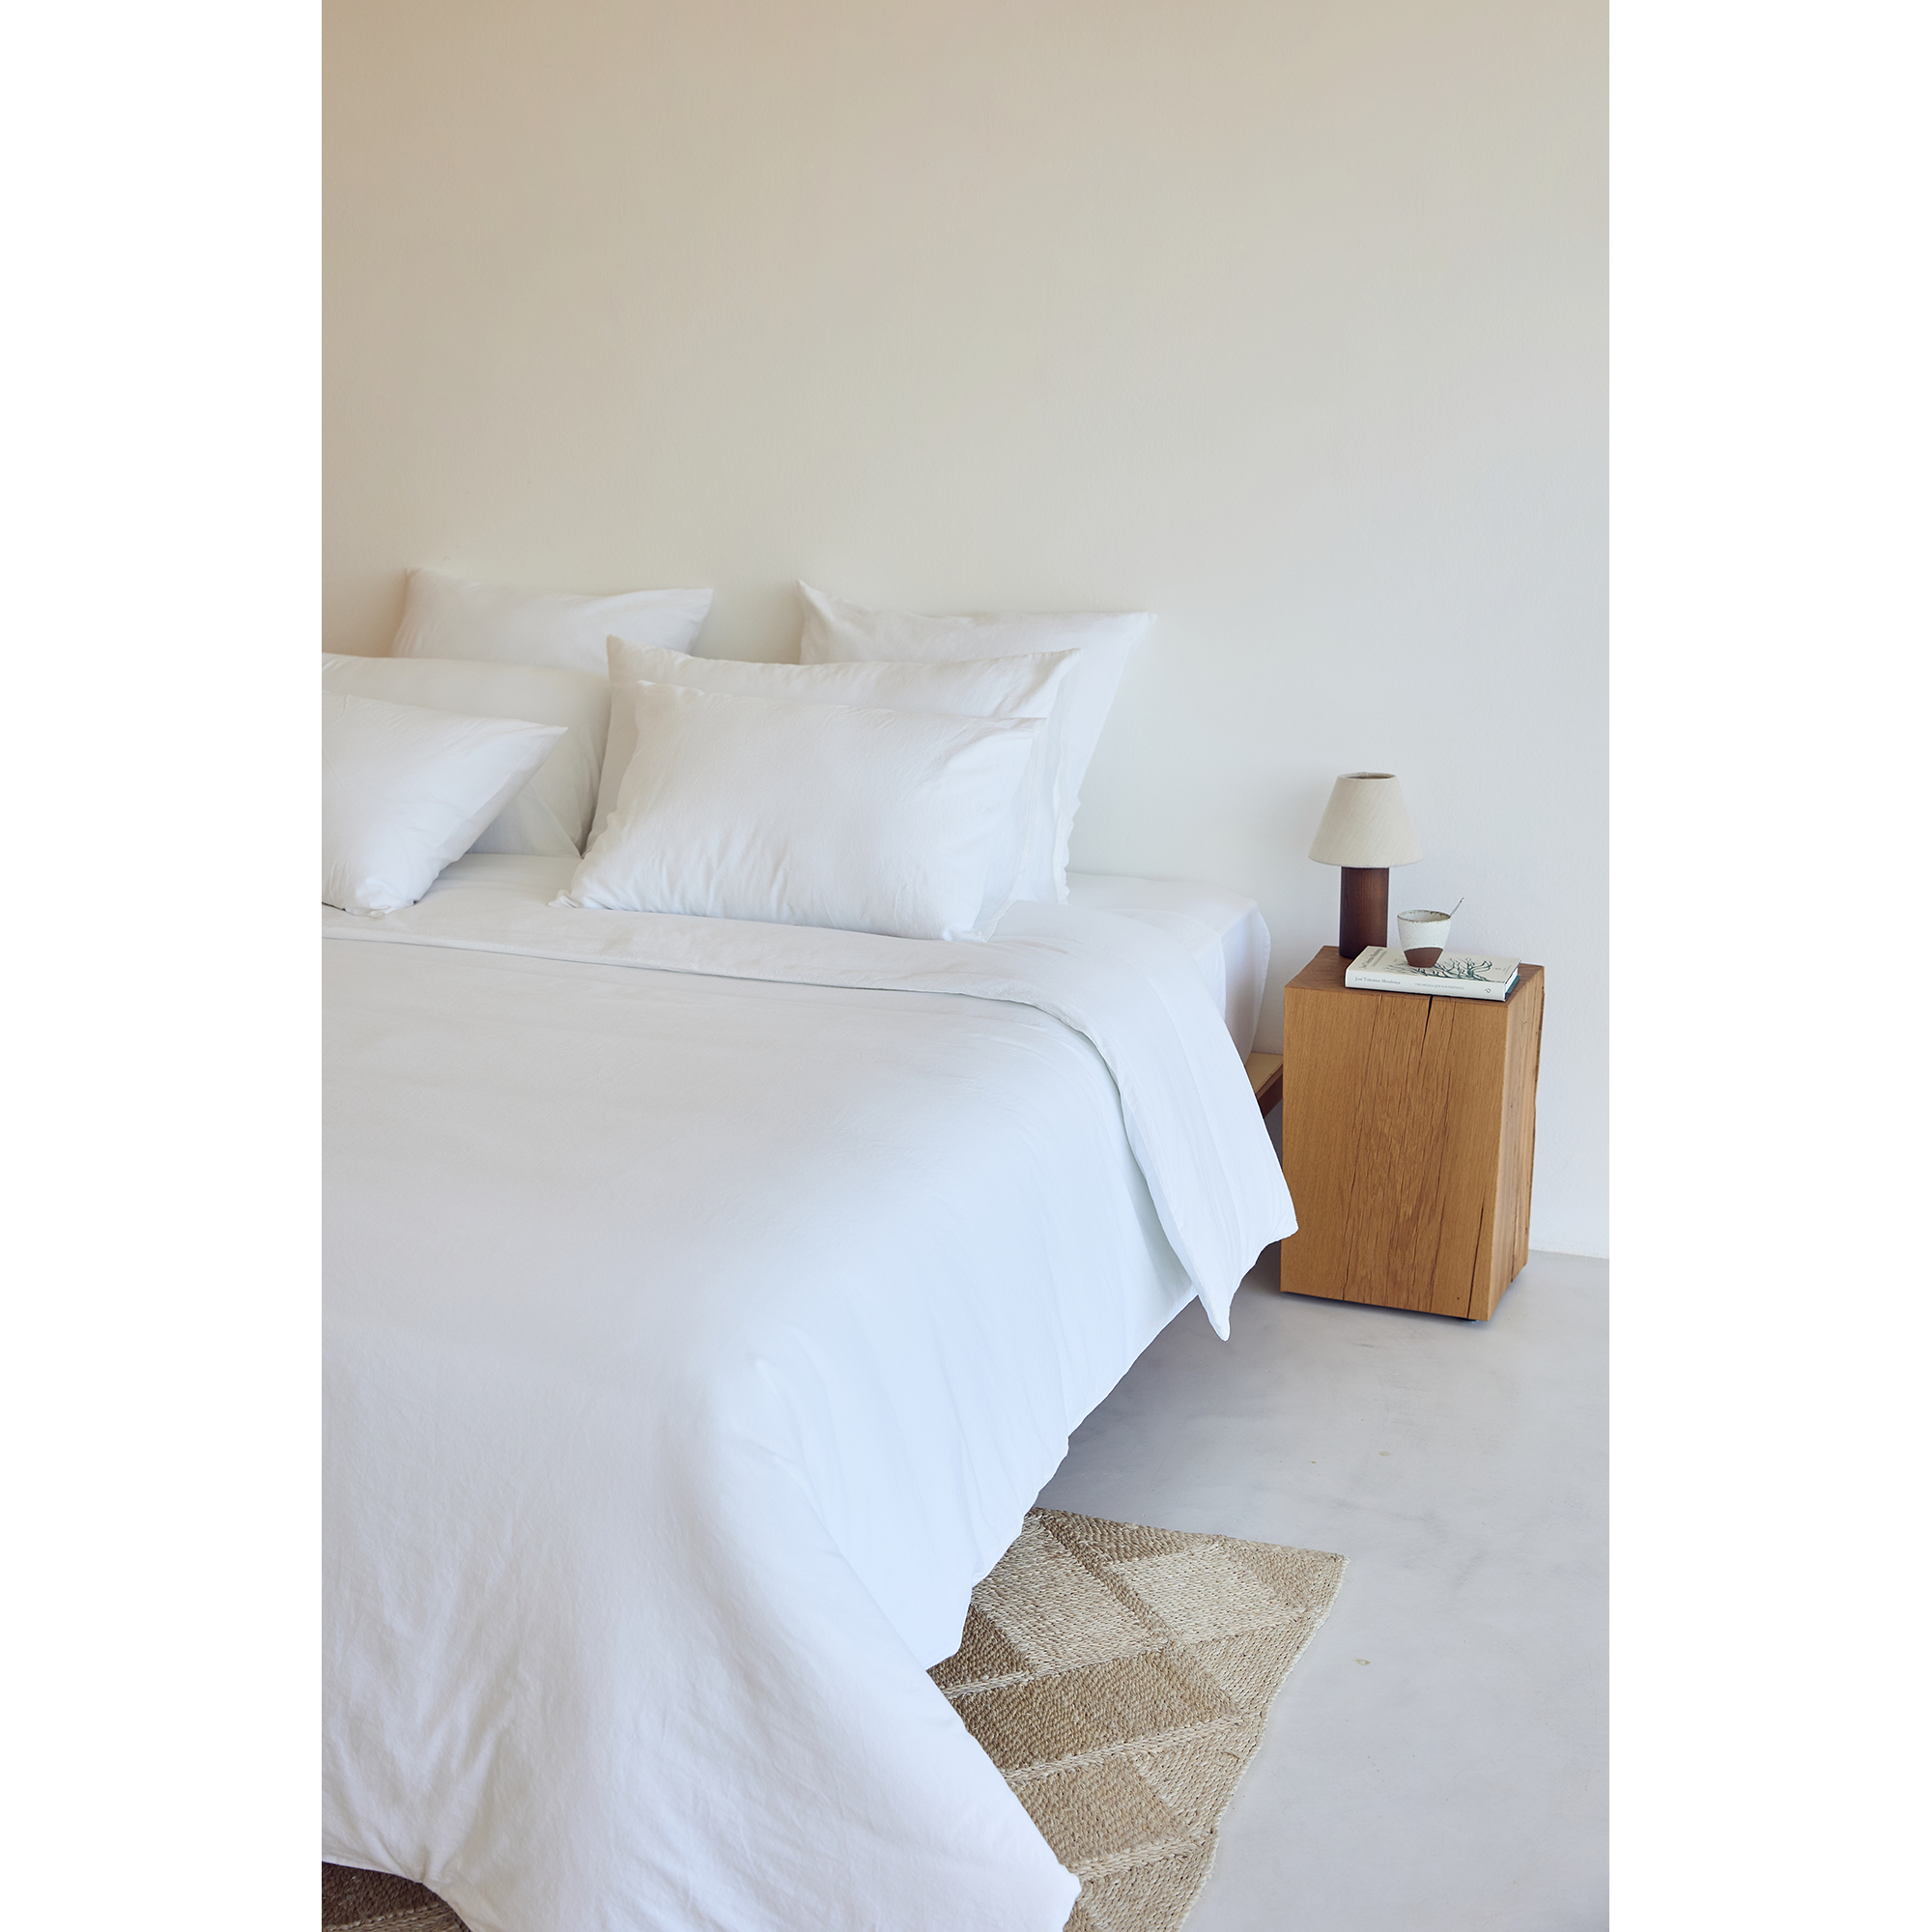 Torres Novas 1845 Duvet cover White - Hotel size - 260 x 240 cm (without pillowcases) - Washed Cotton